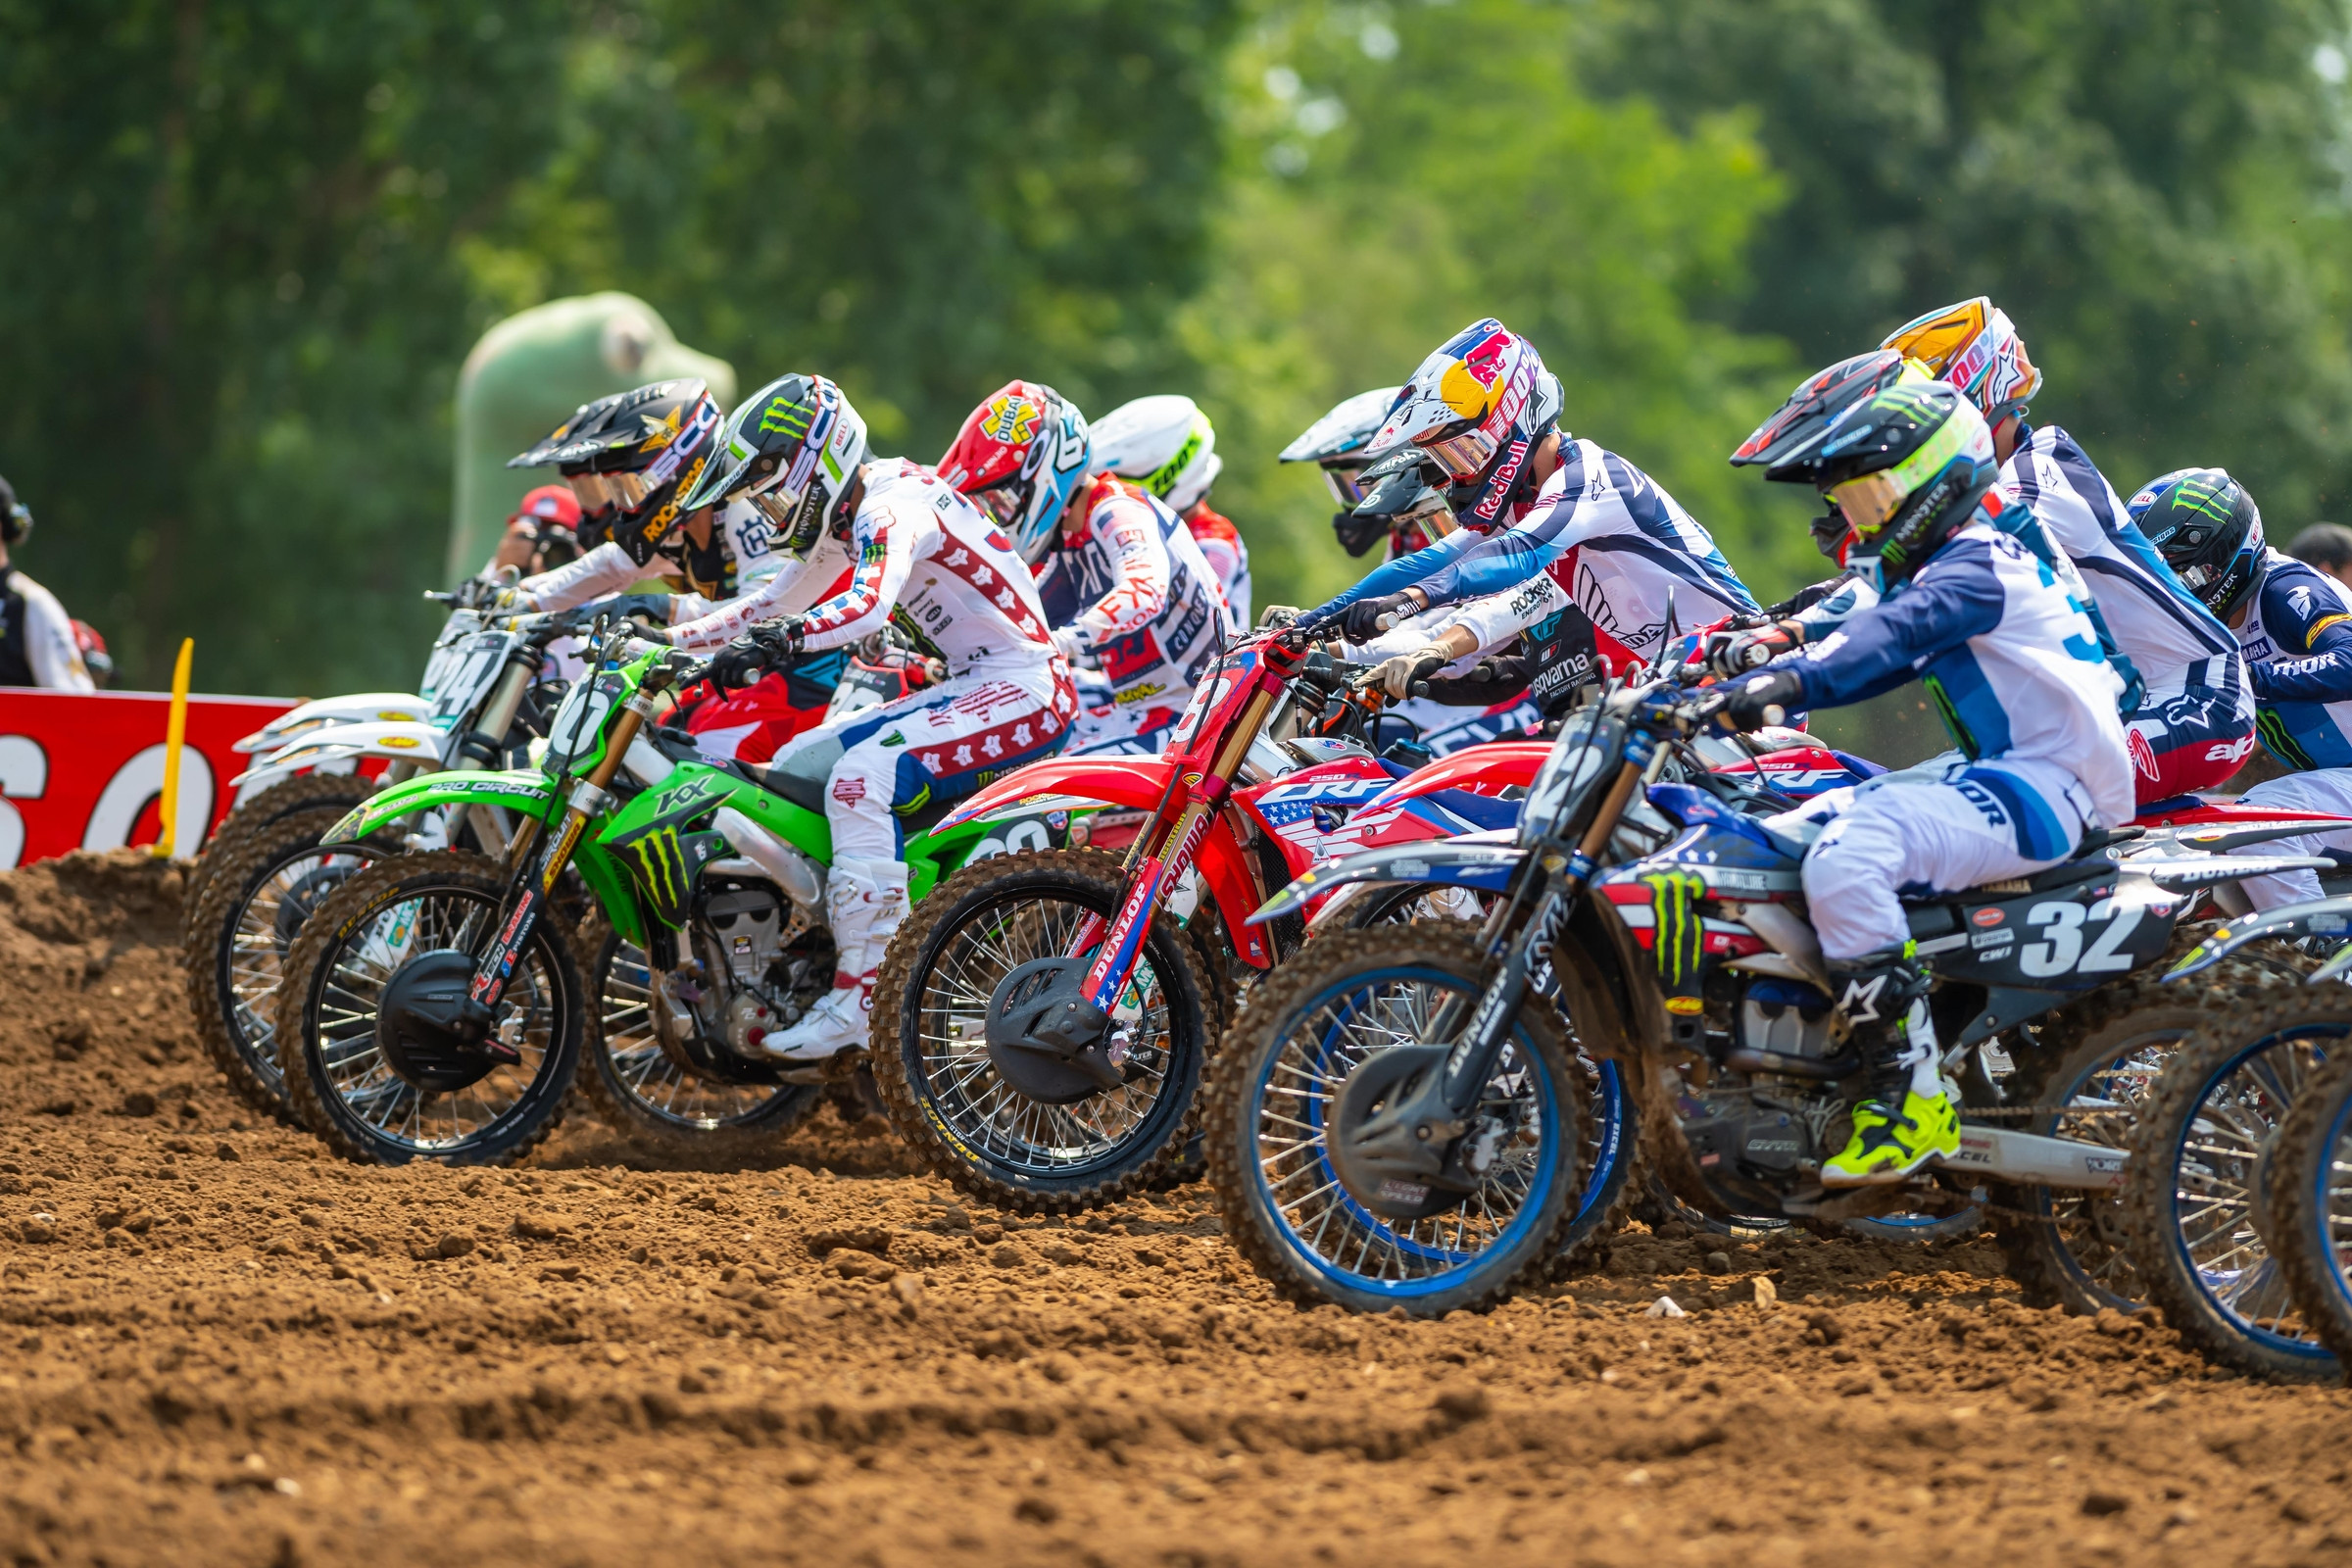 MAVTV and MAVTV Plus Streaming is 2022 Home for Pro Motocross, Discounts Available